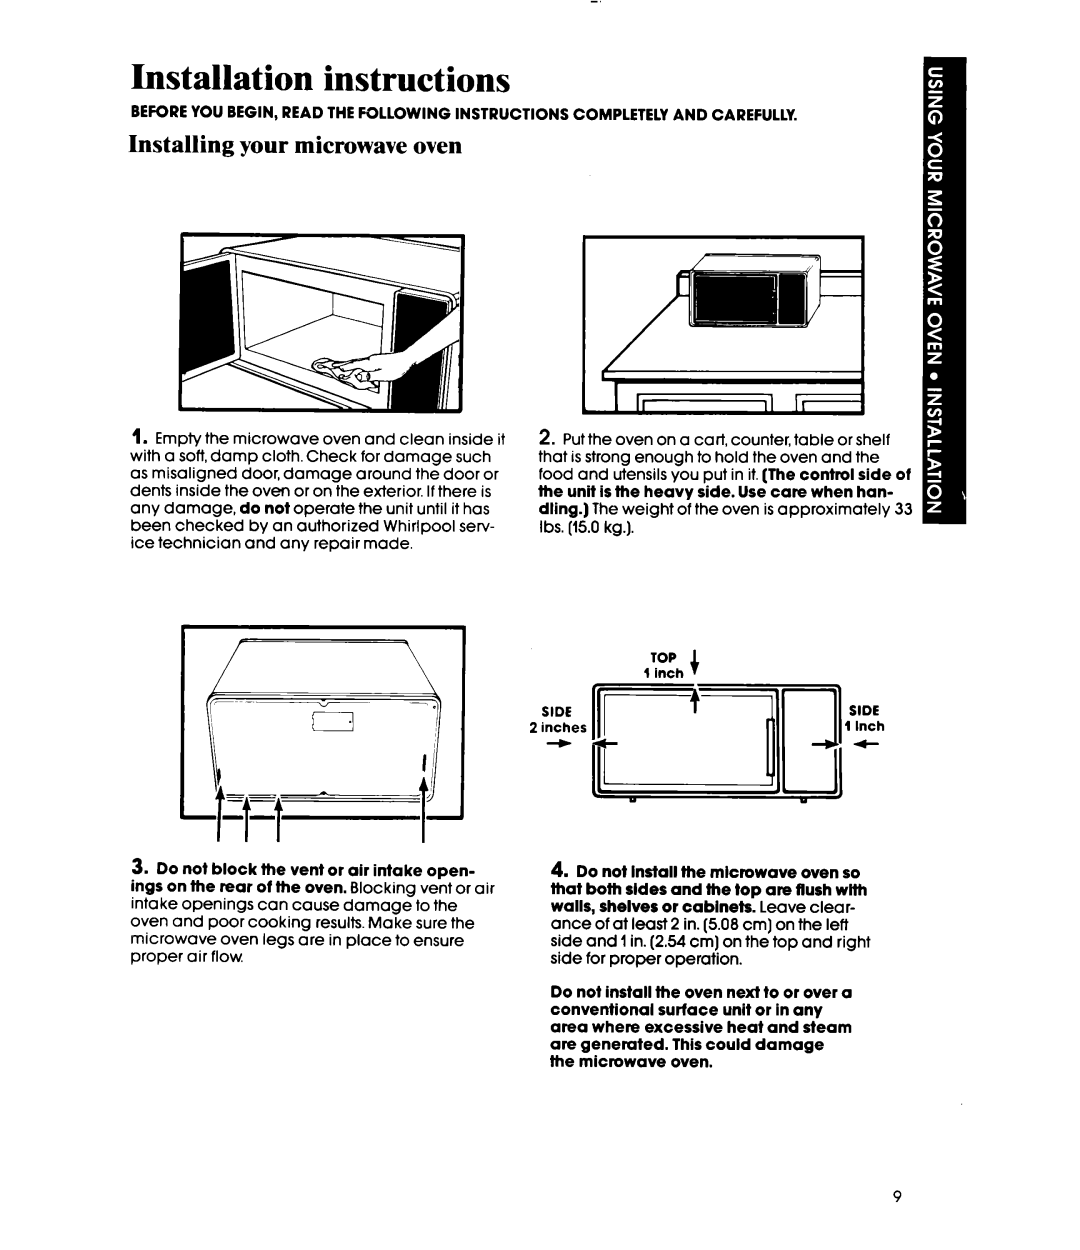 Whirlpool MW1000XP manual Installation instructions, Installing your microwave oven 